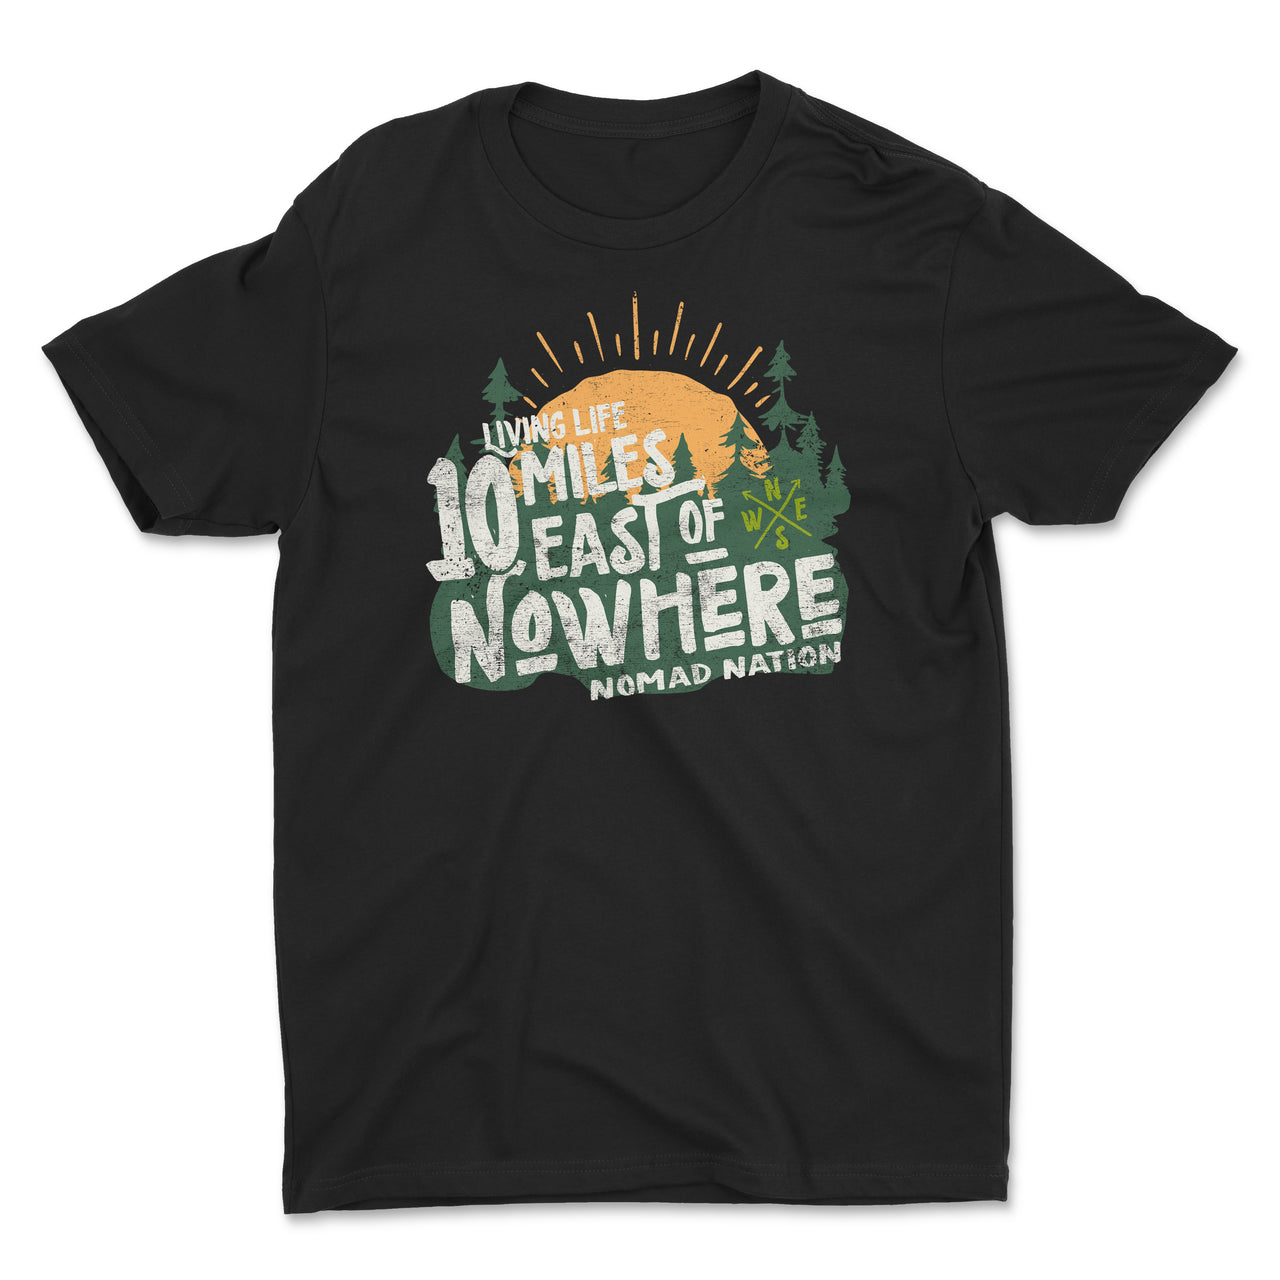 10 Miles East of Nowhere Shirt